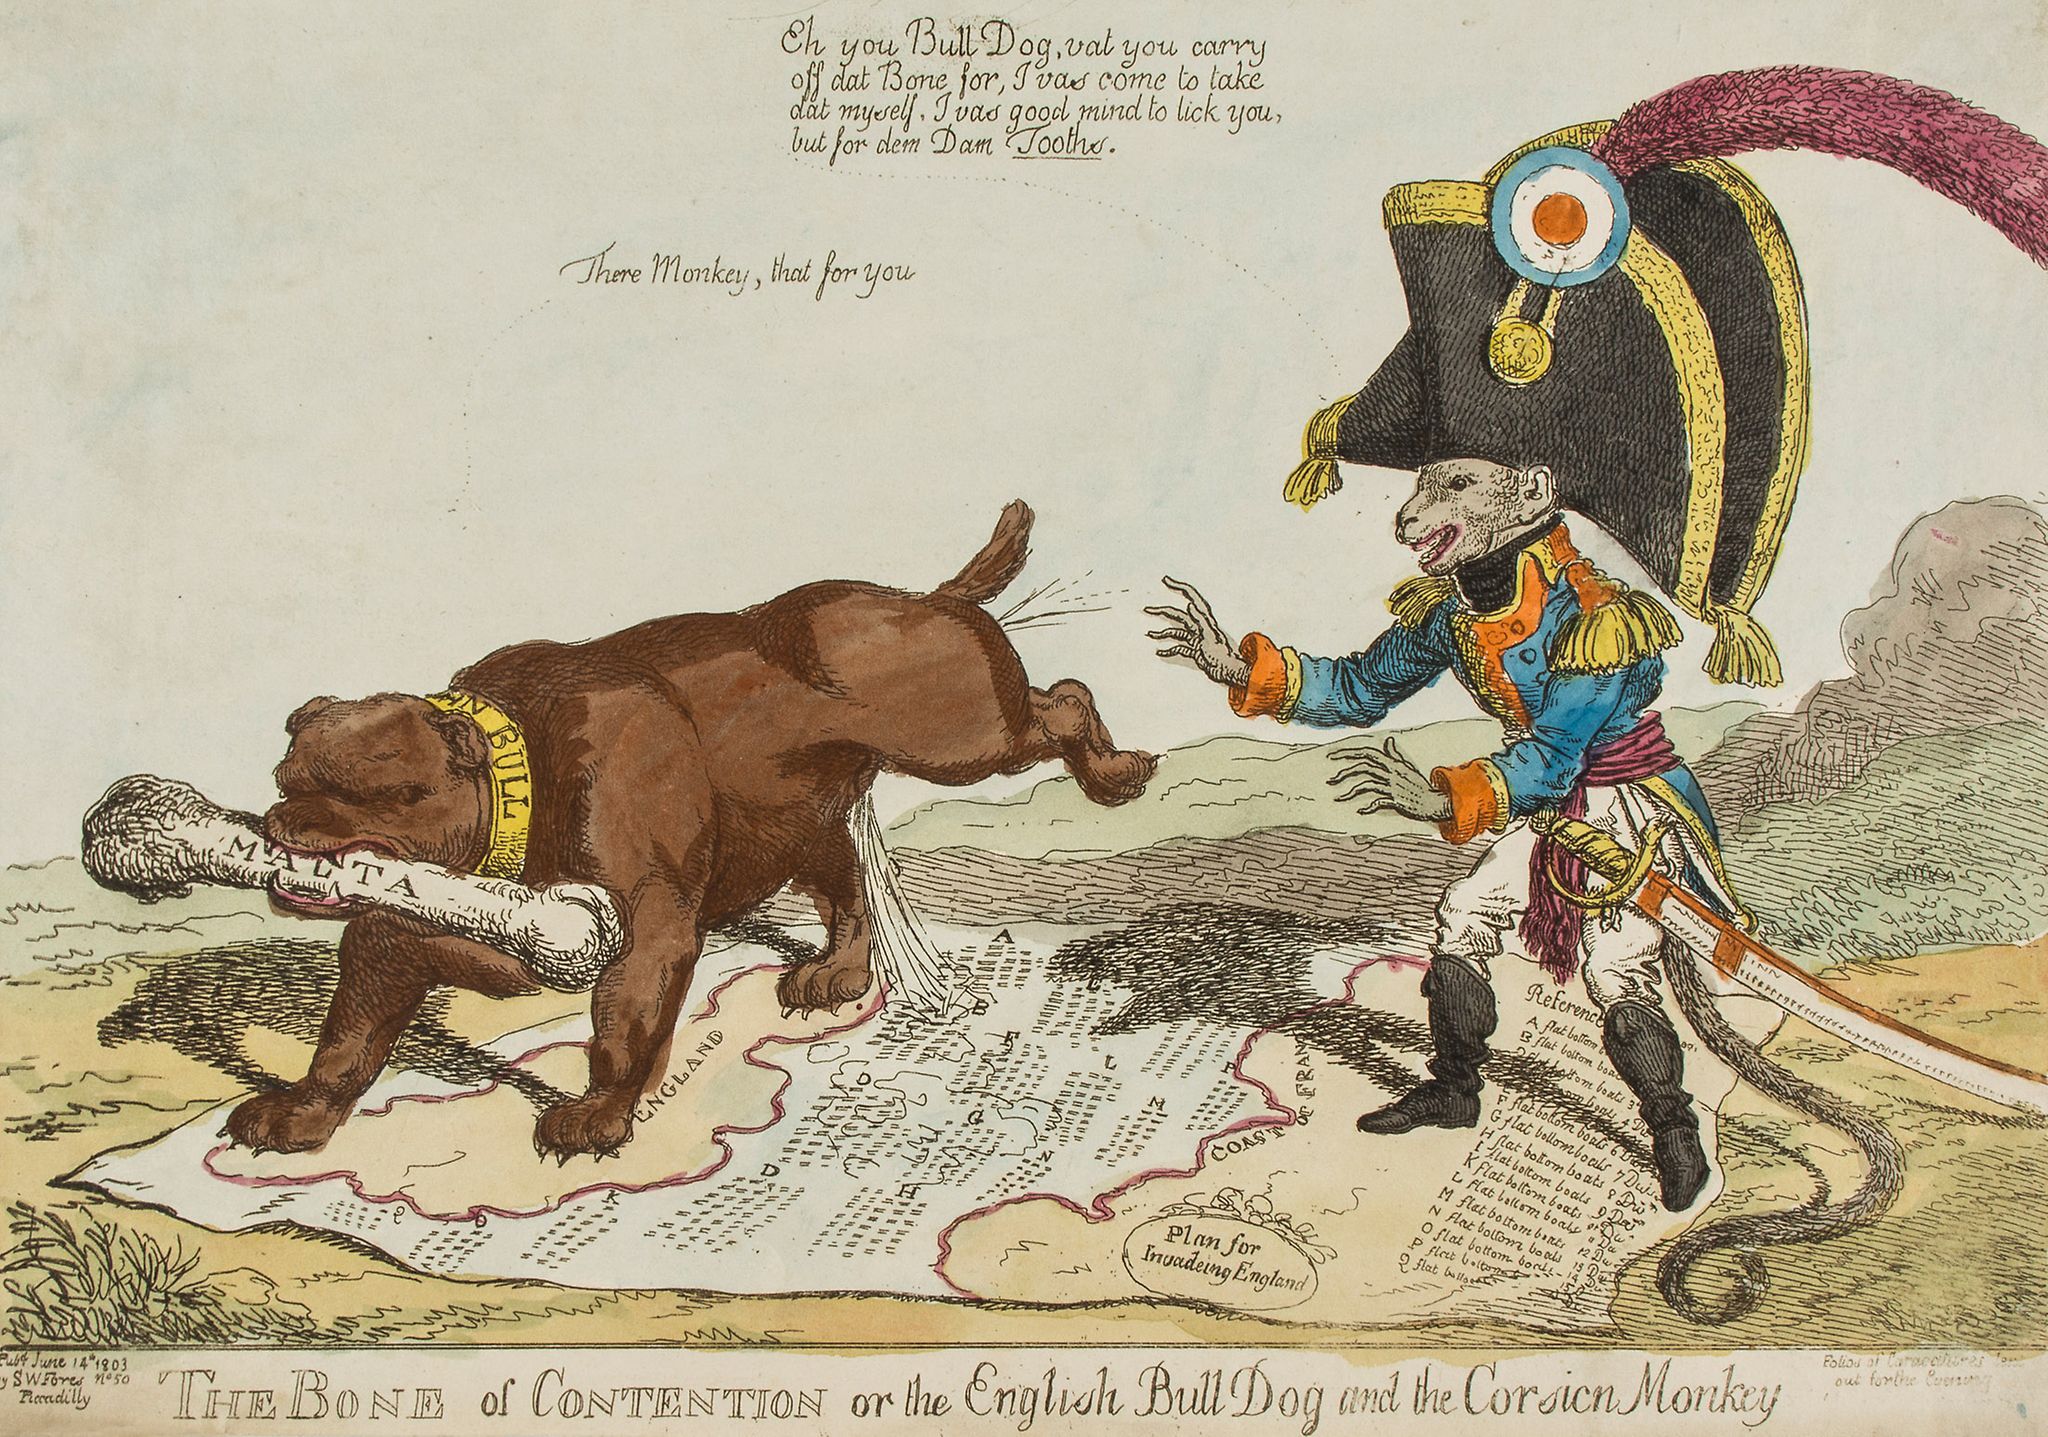 [Williams (Charles)] - The Bone of Contention or the English Bull Dog and the Corsican Monkey; Bruin